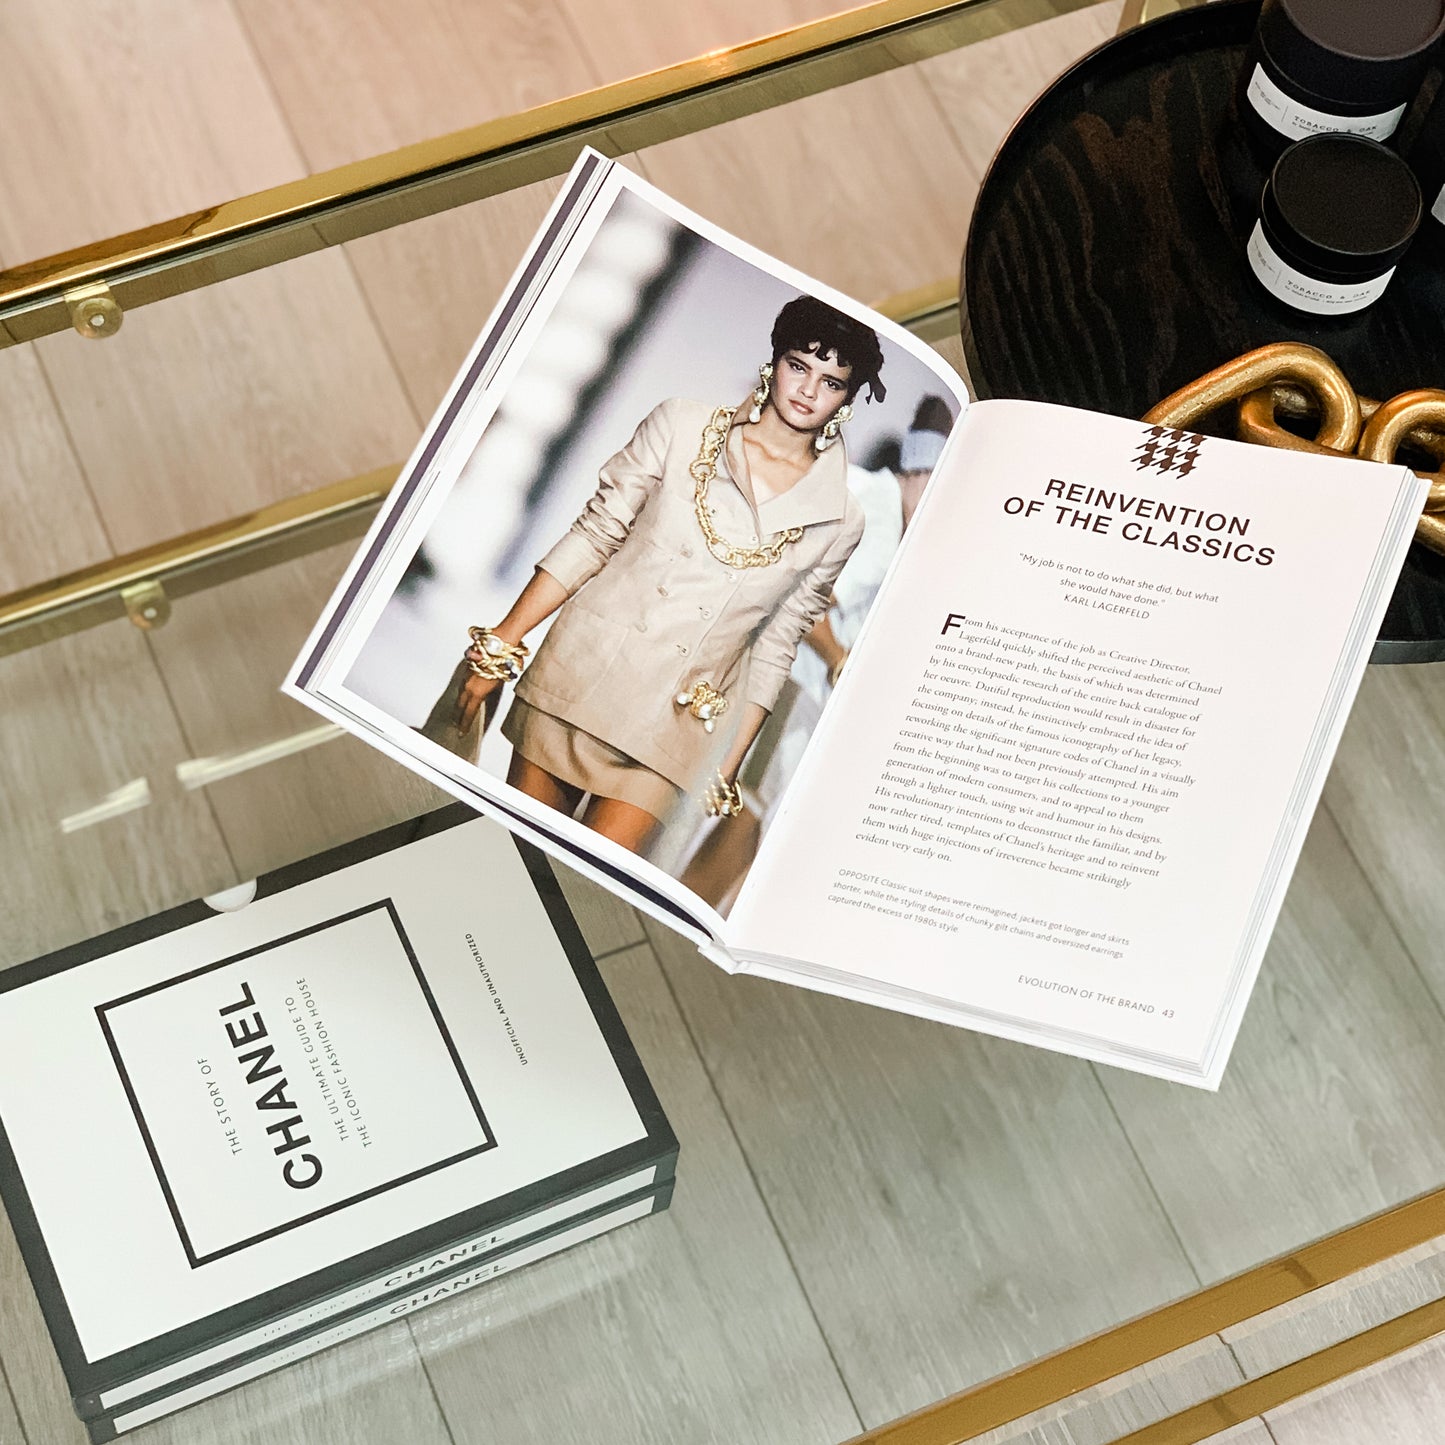 Chanel Coffee Table Book Set